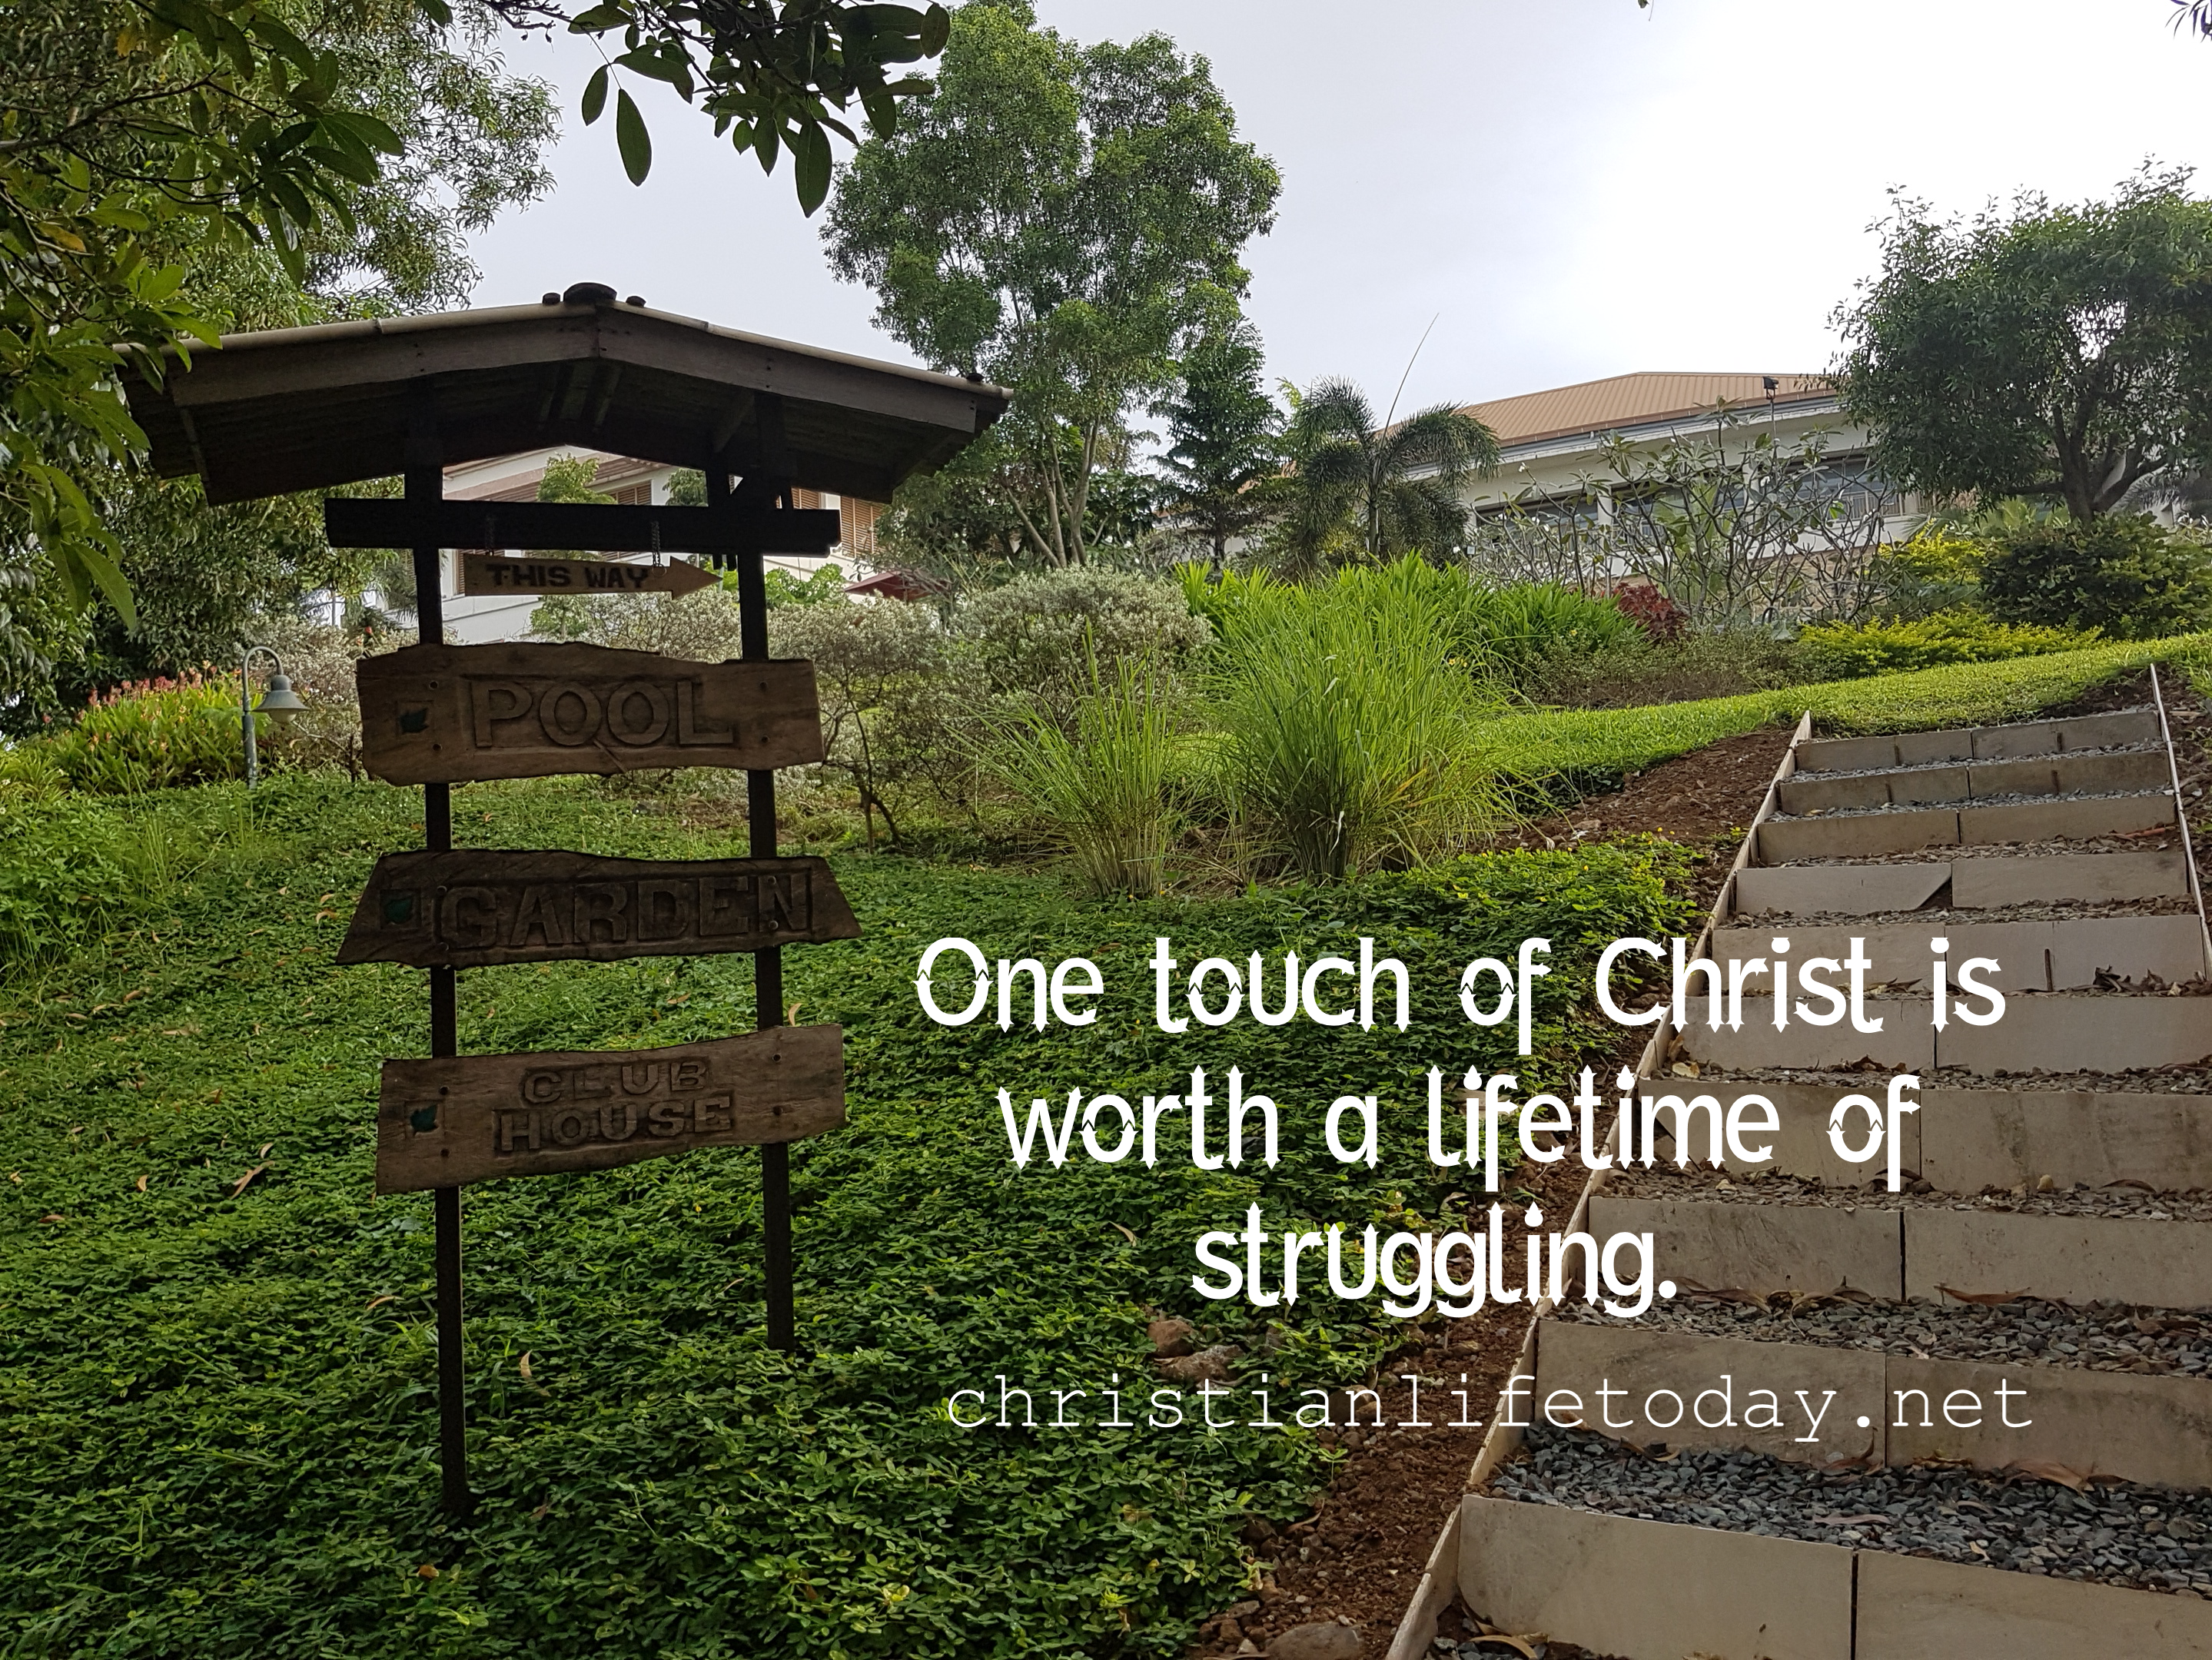 One touch of Christ is worth a lifetime of struggling